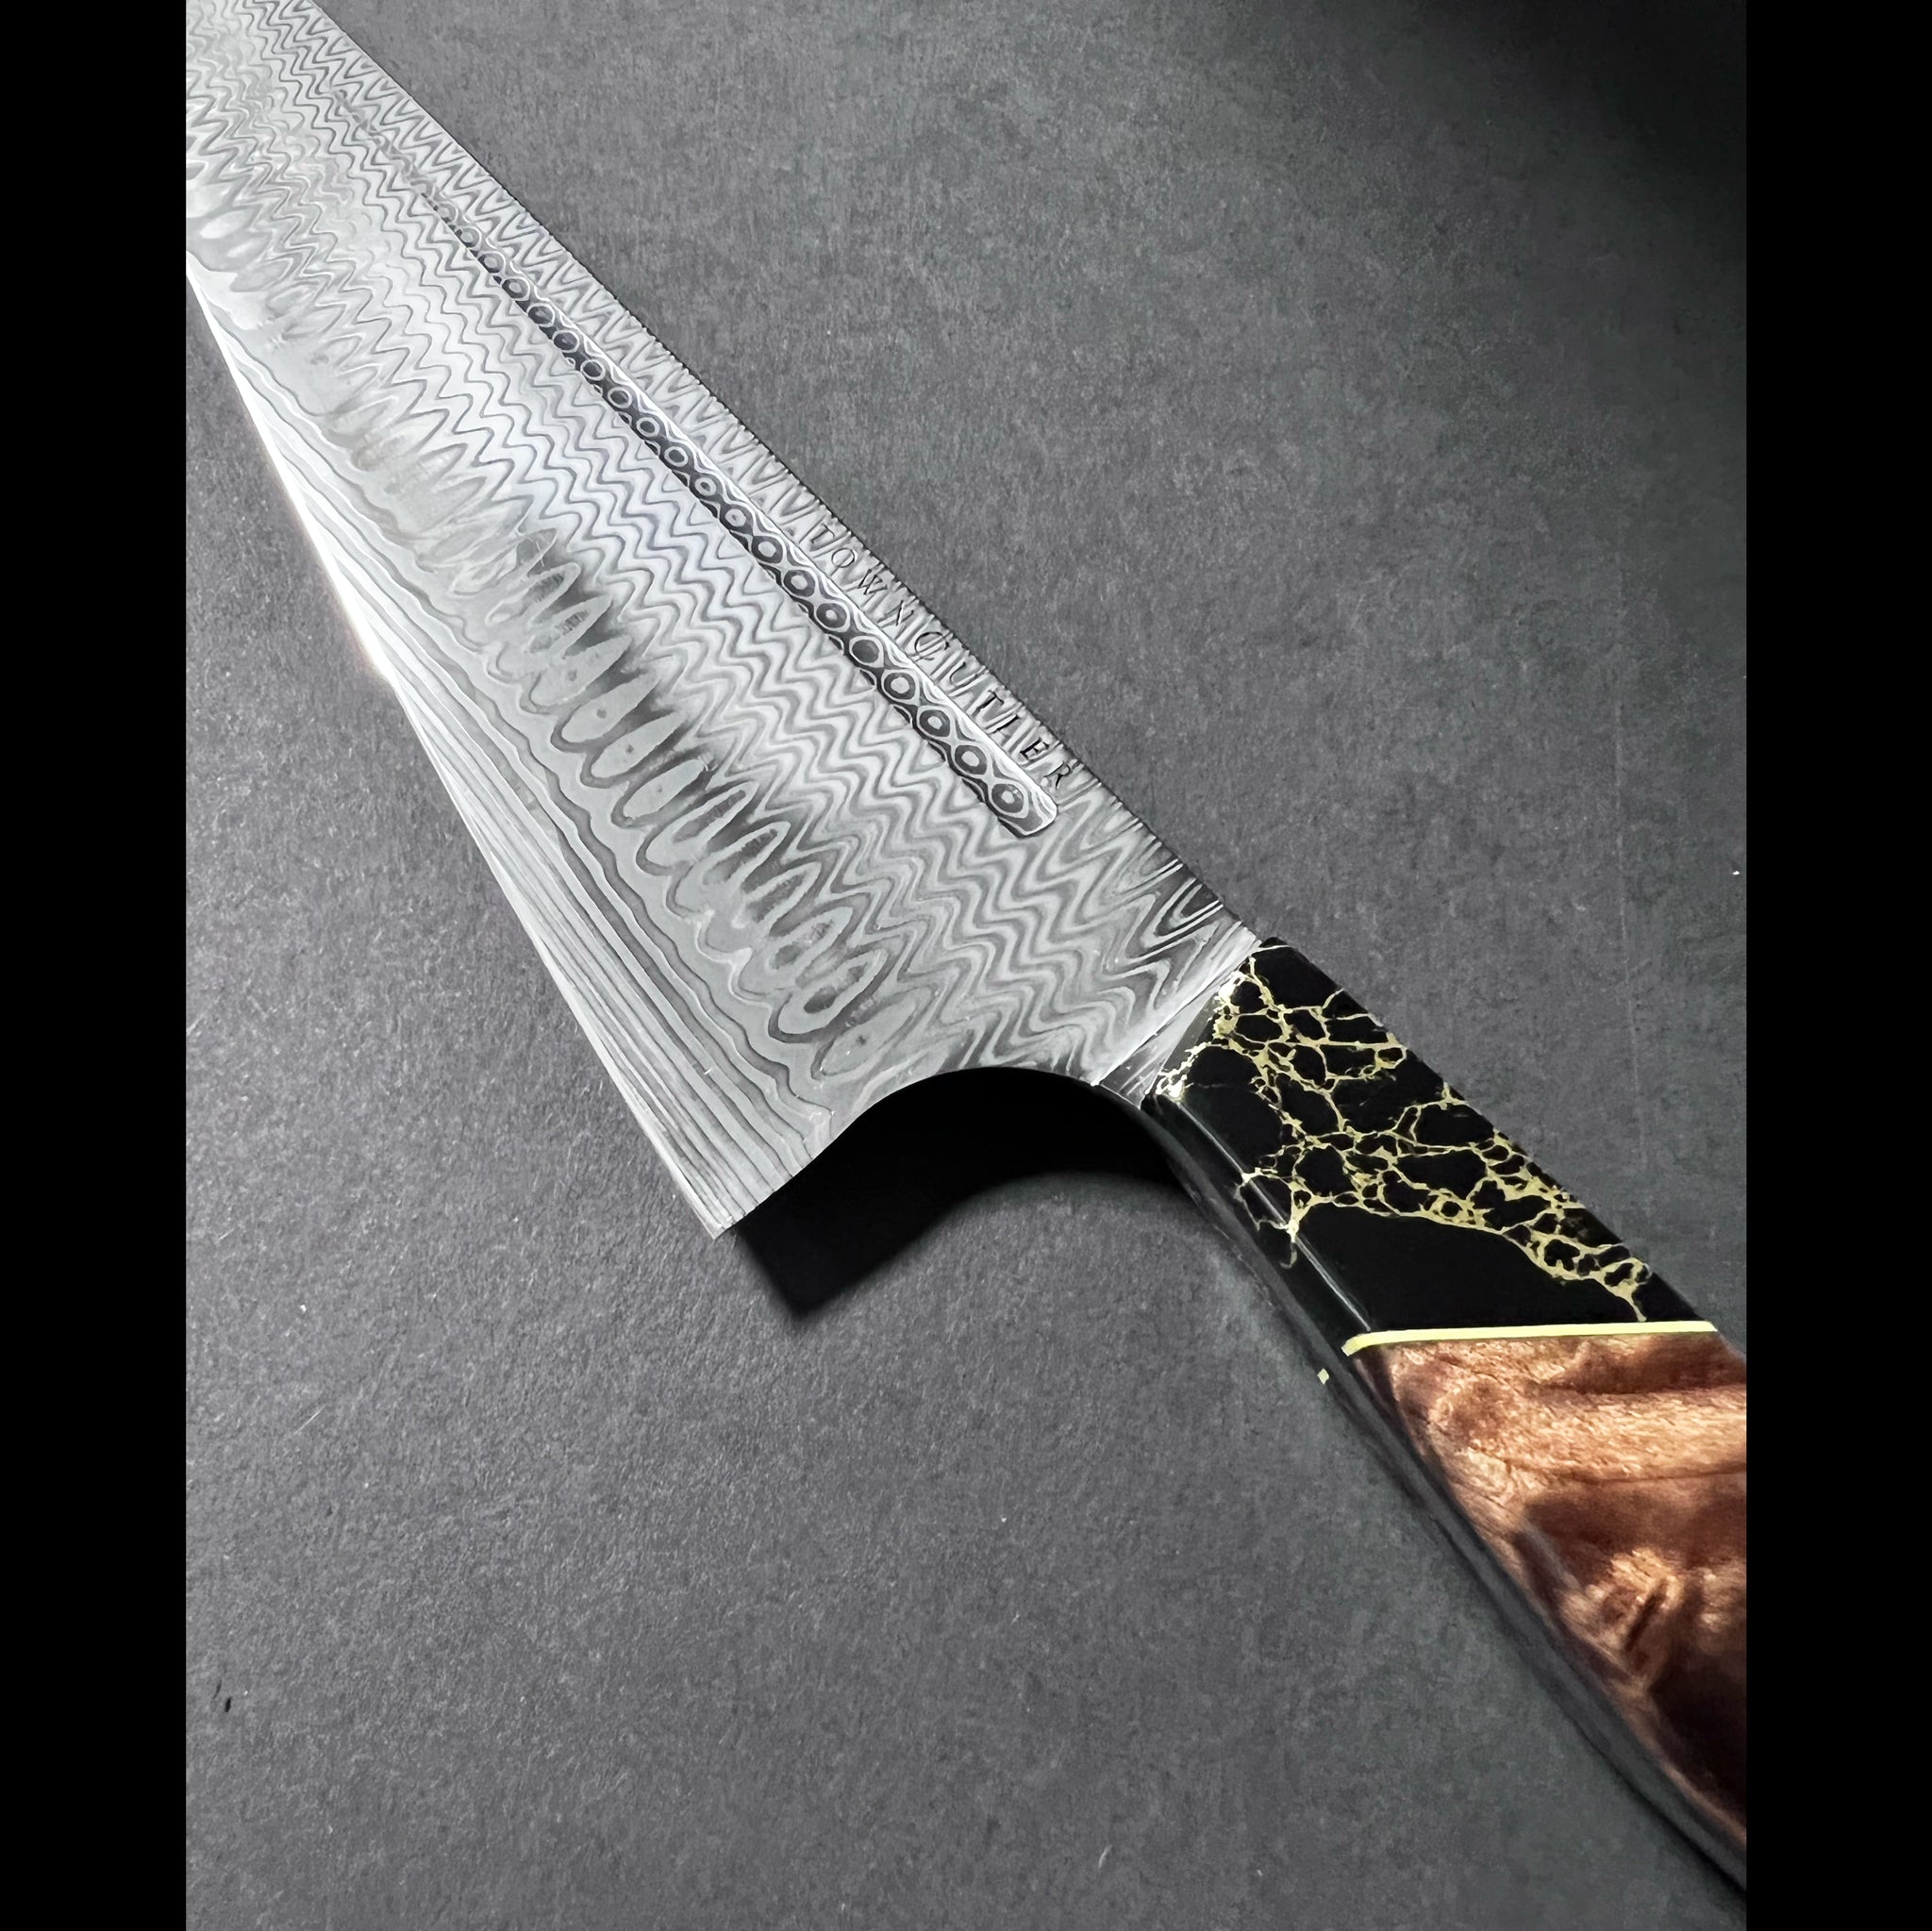 Town Cutler Damasteel Chef Knife. Knife blade is made from Damasteel® Björkmans Twist™ Damascus Steel. Handle is made from Ironwood with Buckeye Burl Moons and Black G-10 Liner